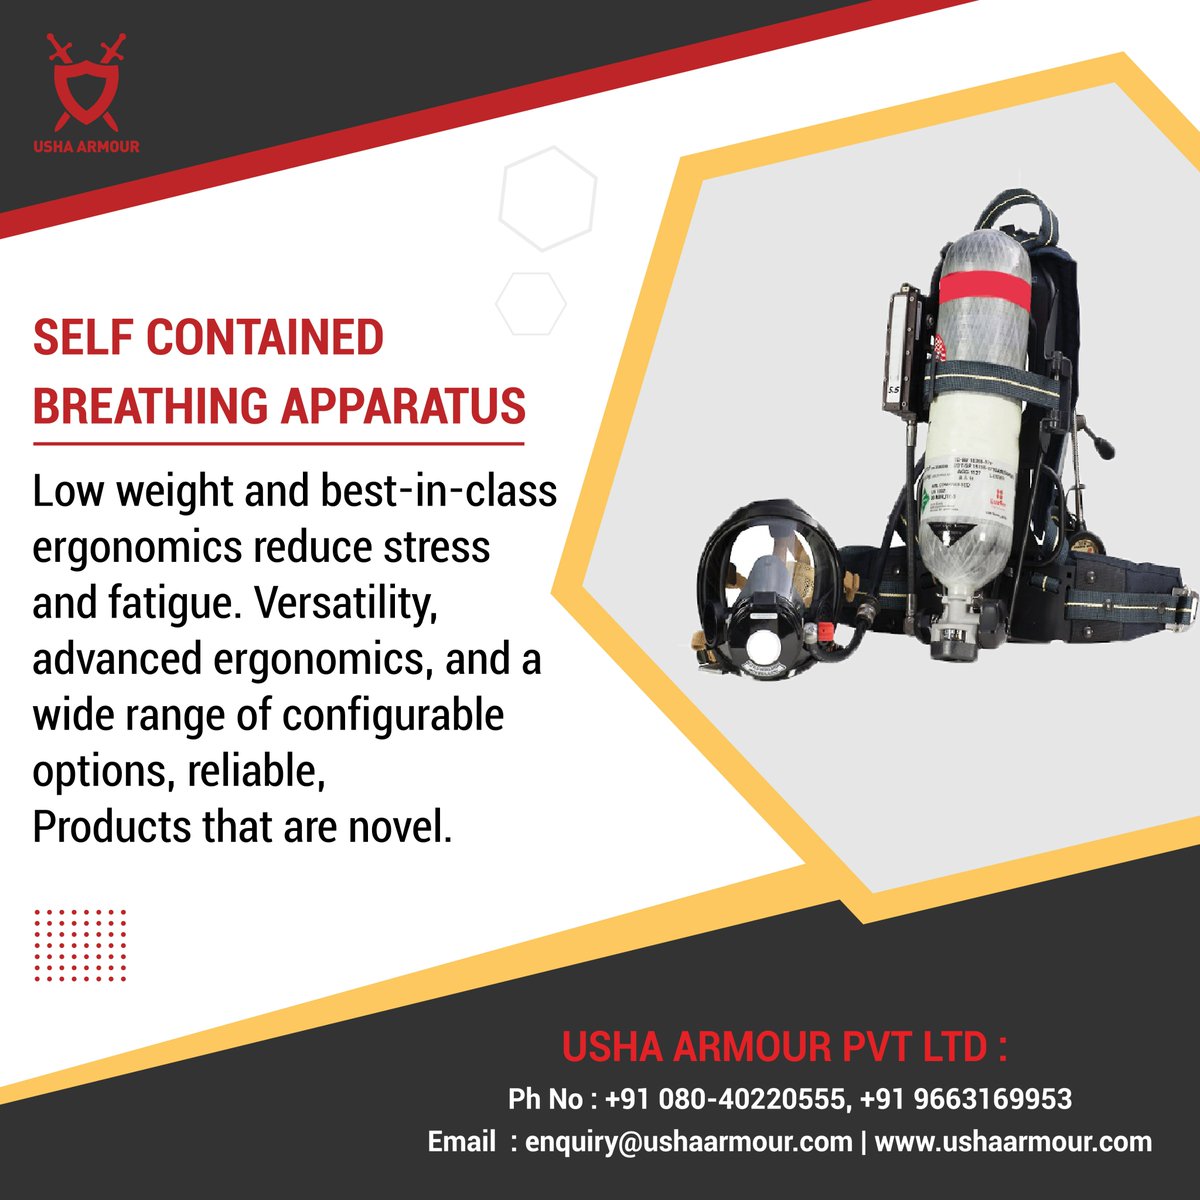 Advanced Breathing Apparatuses for Safety, Reliability, and Usability Professional Safety Technology and Personal Protective Equipment Manufacturer.

#scba #selfcontainedbreathingapparatus #safetyequiptment #firesafety #firesafetyproducts #fireequipments  #ushaarmour